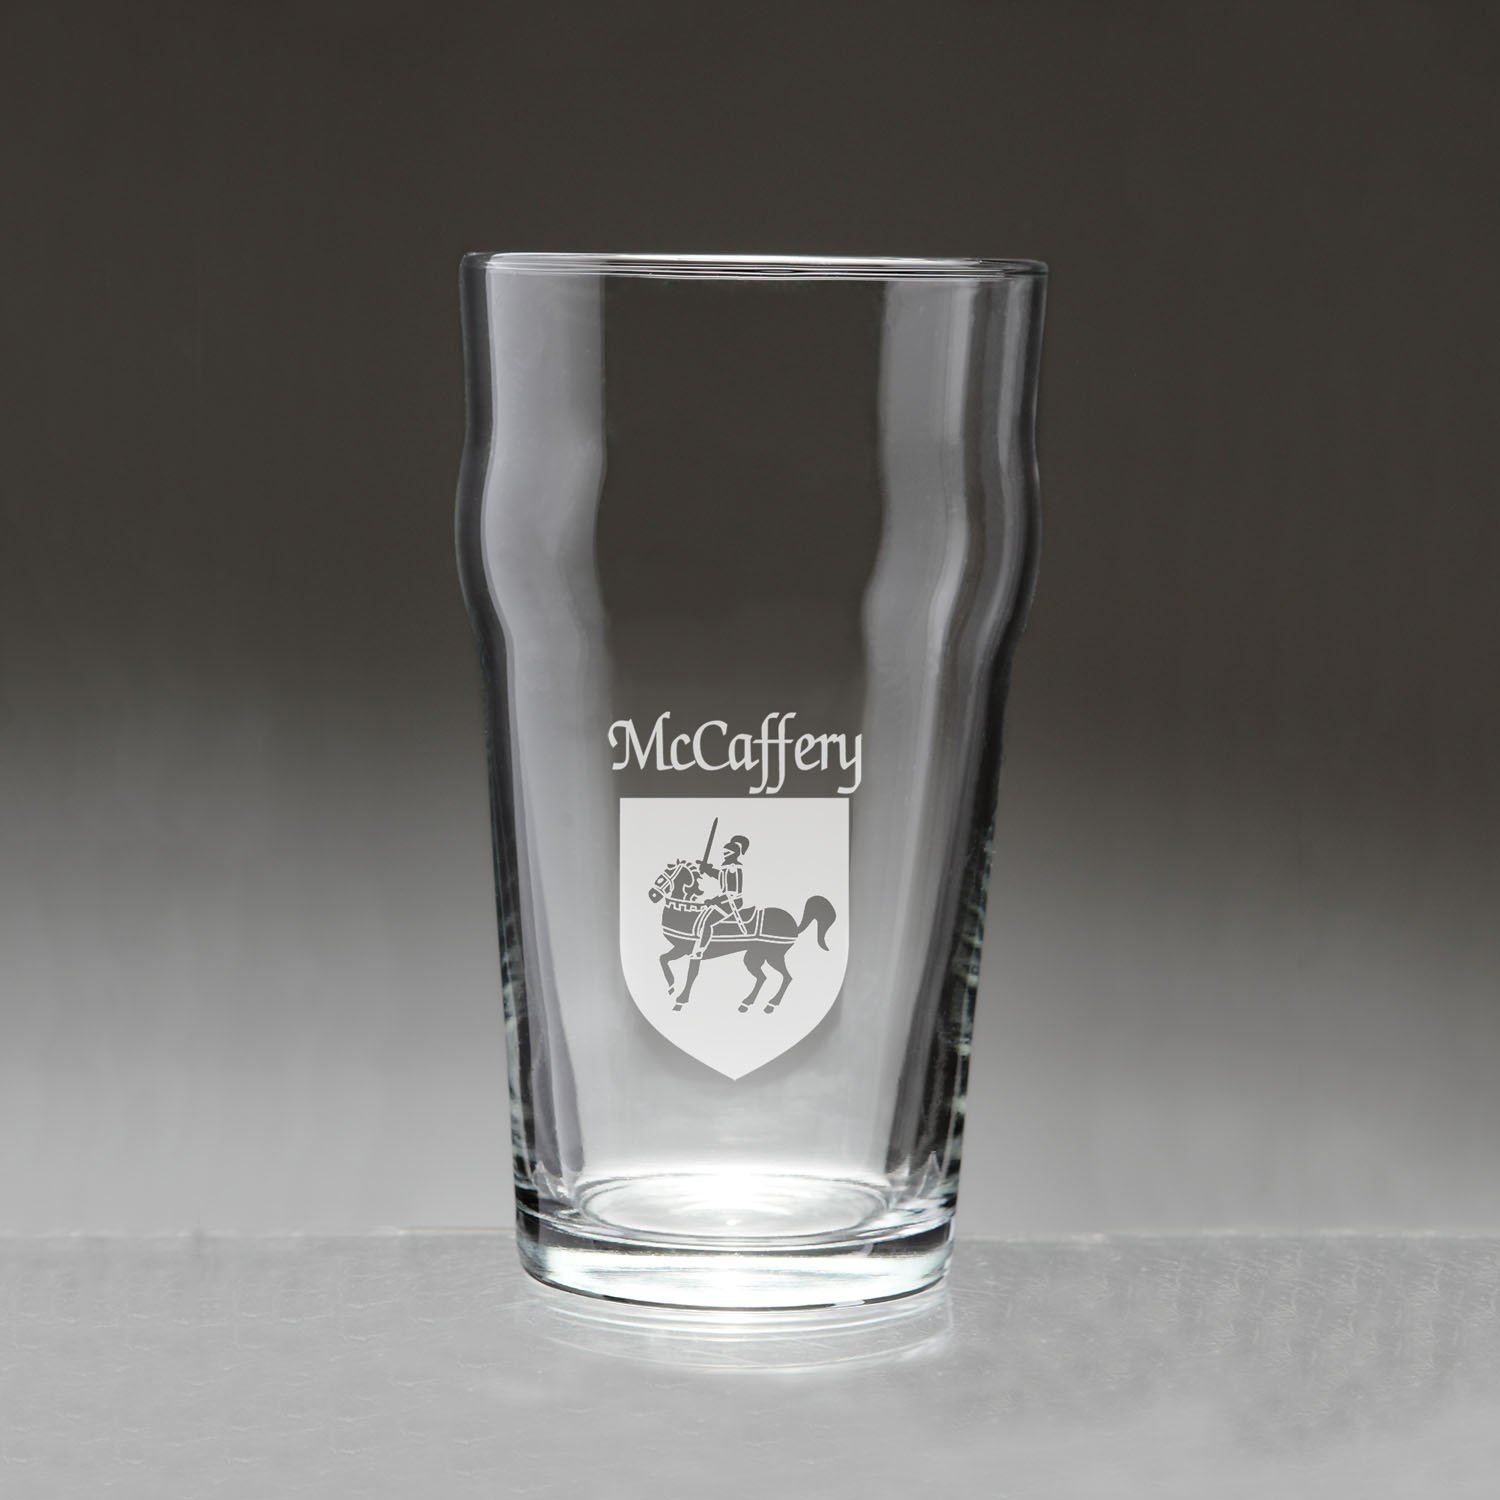 Primary image for McCaffery Irish Coat of Arms Pub Glasses - Set of 4 (Sand Etched)